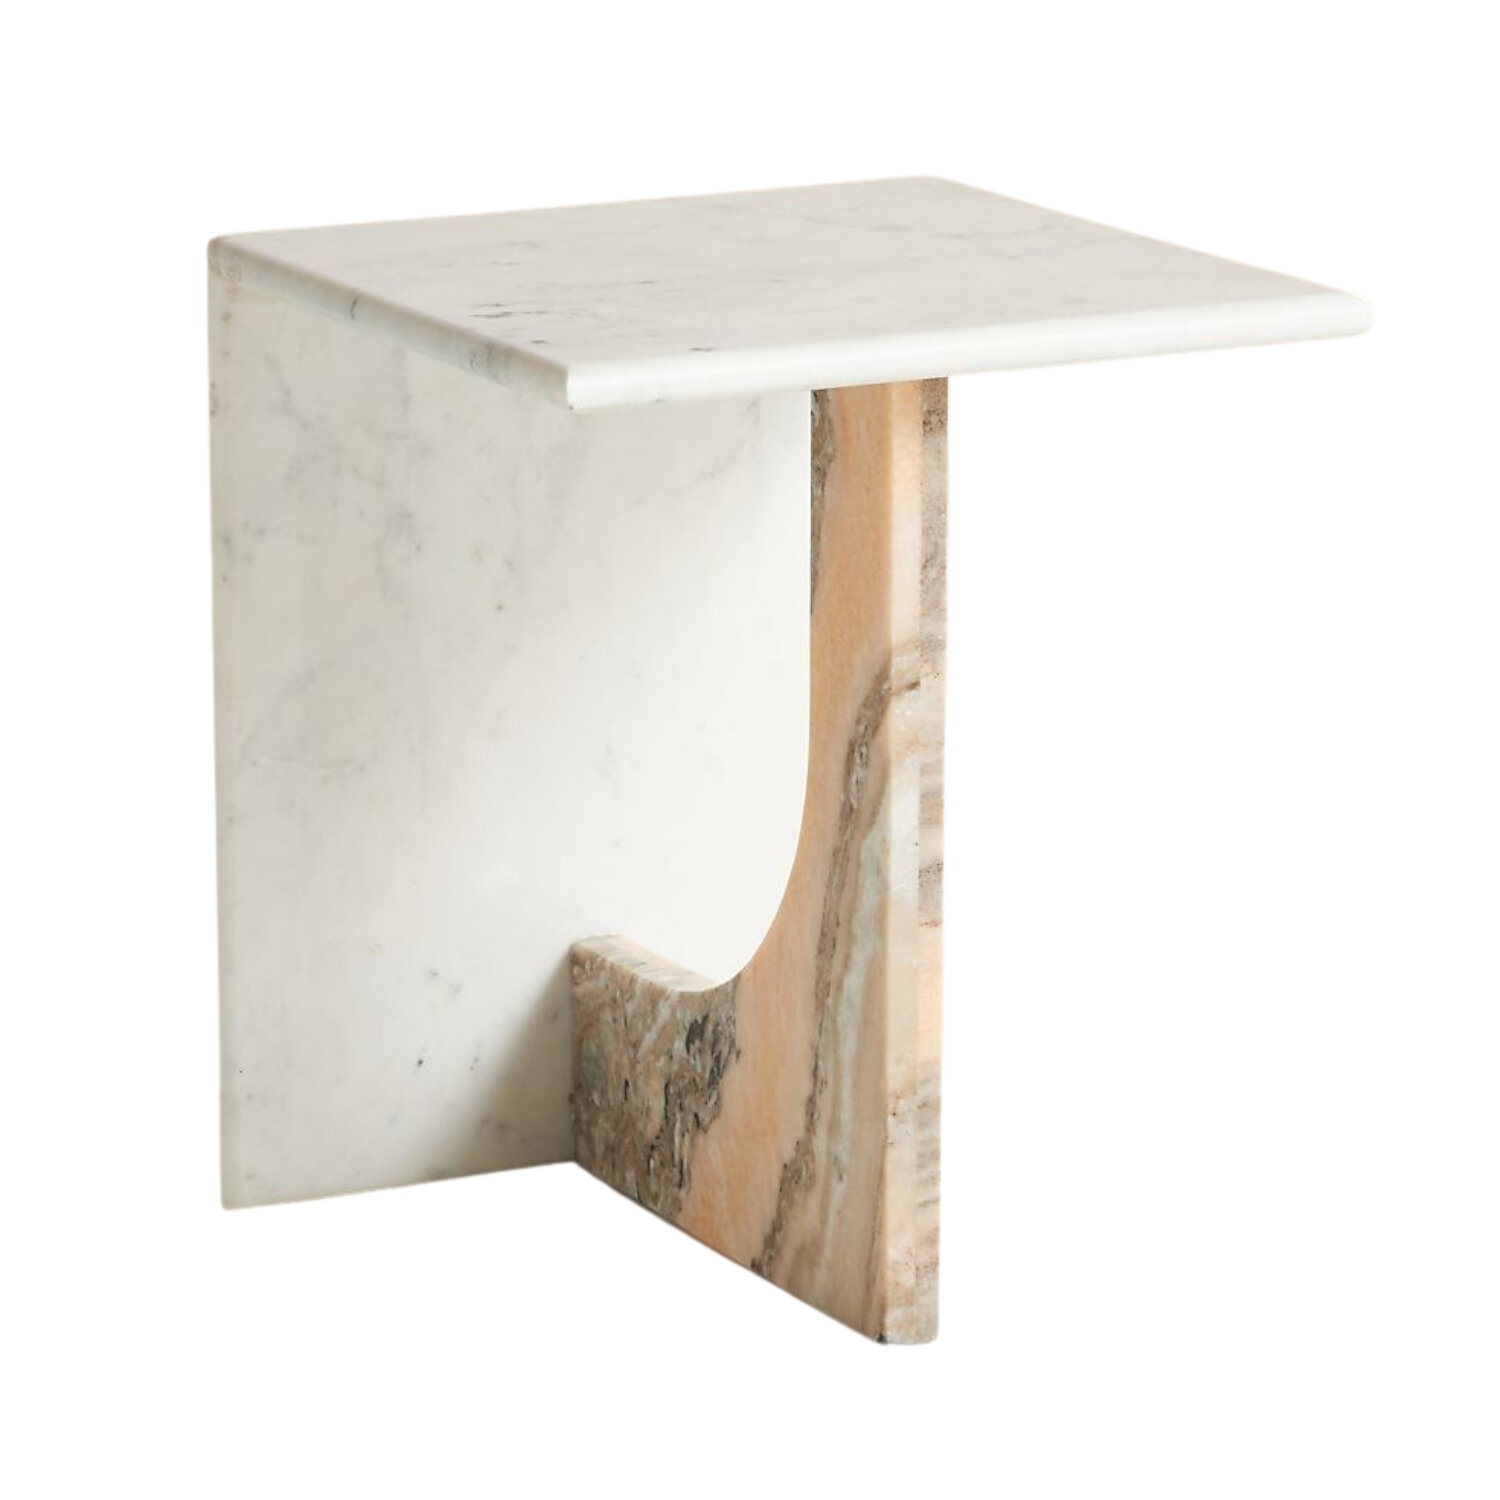 Beau Pieced Marble Side Table, Anthropologie, $498